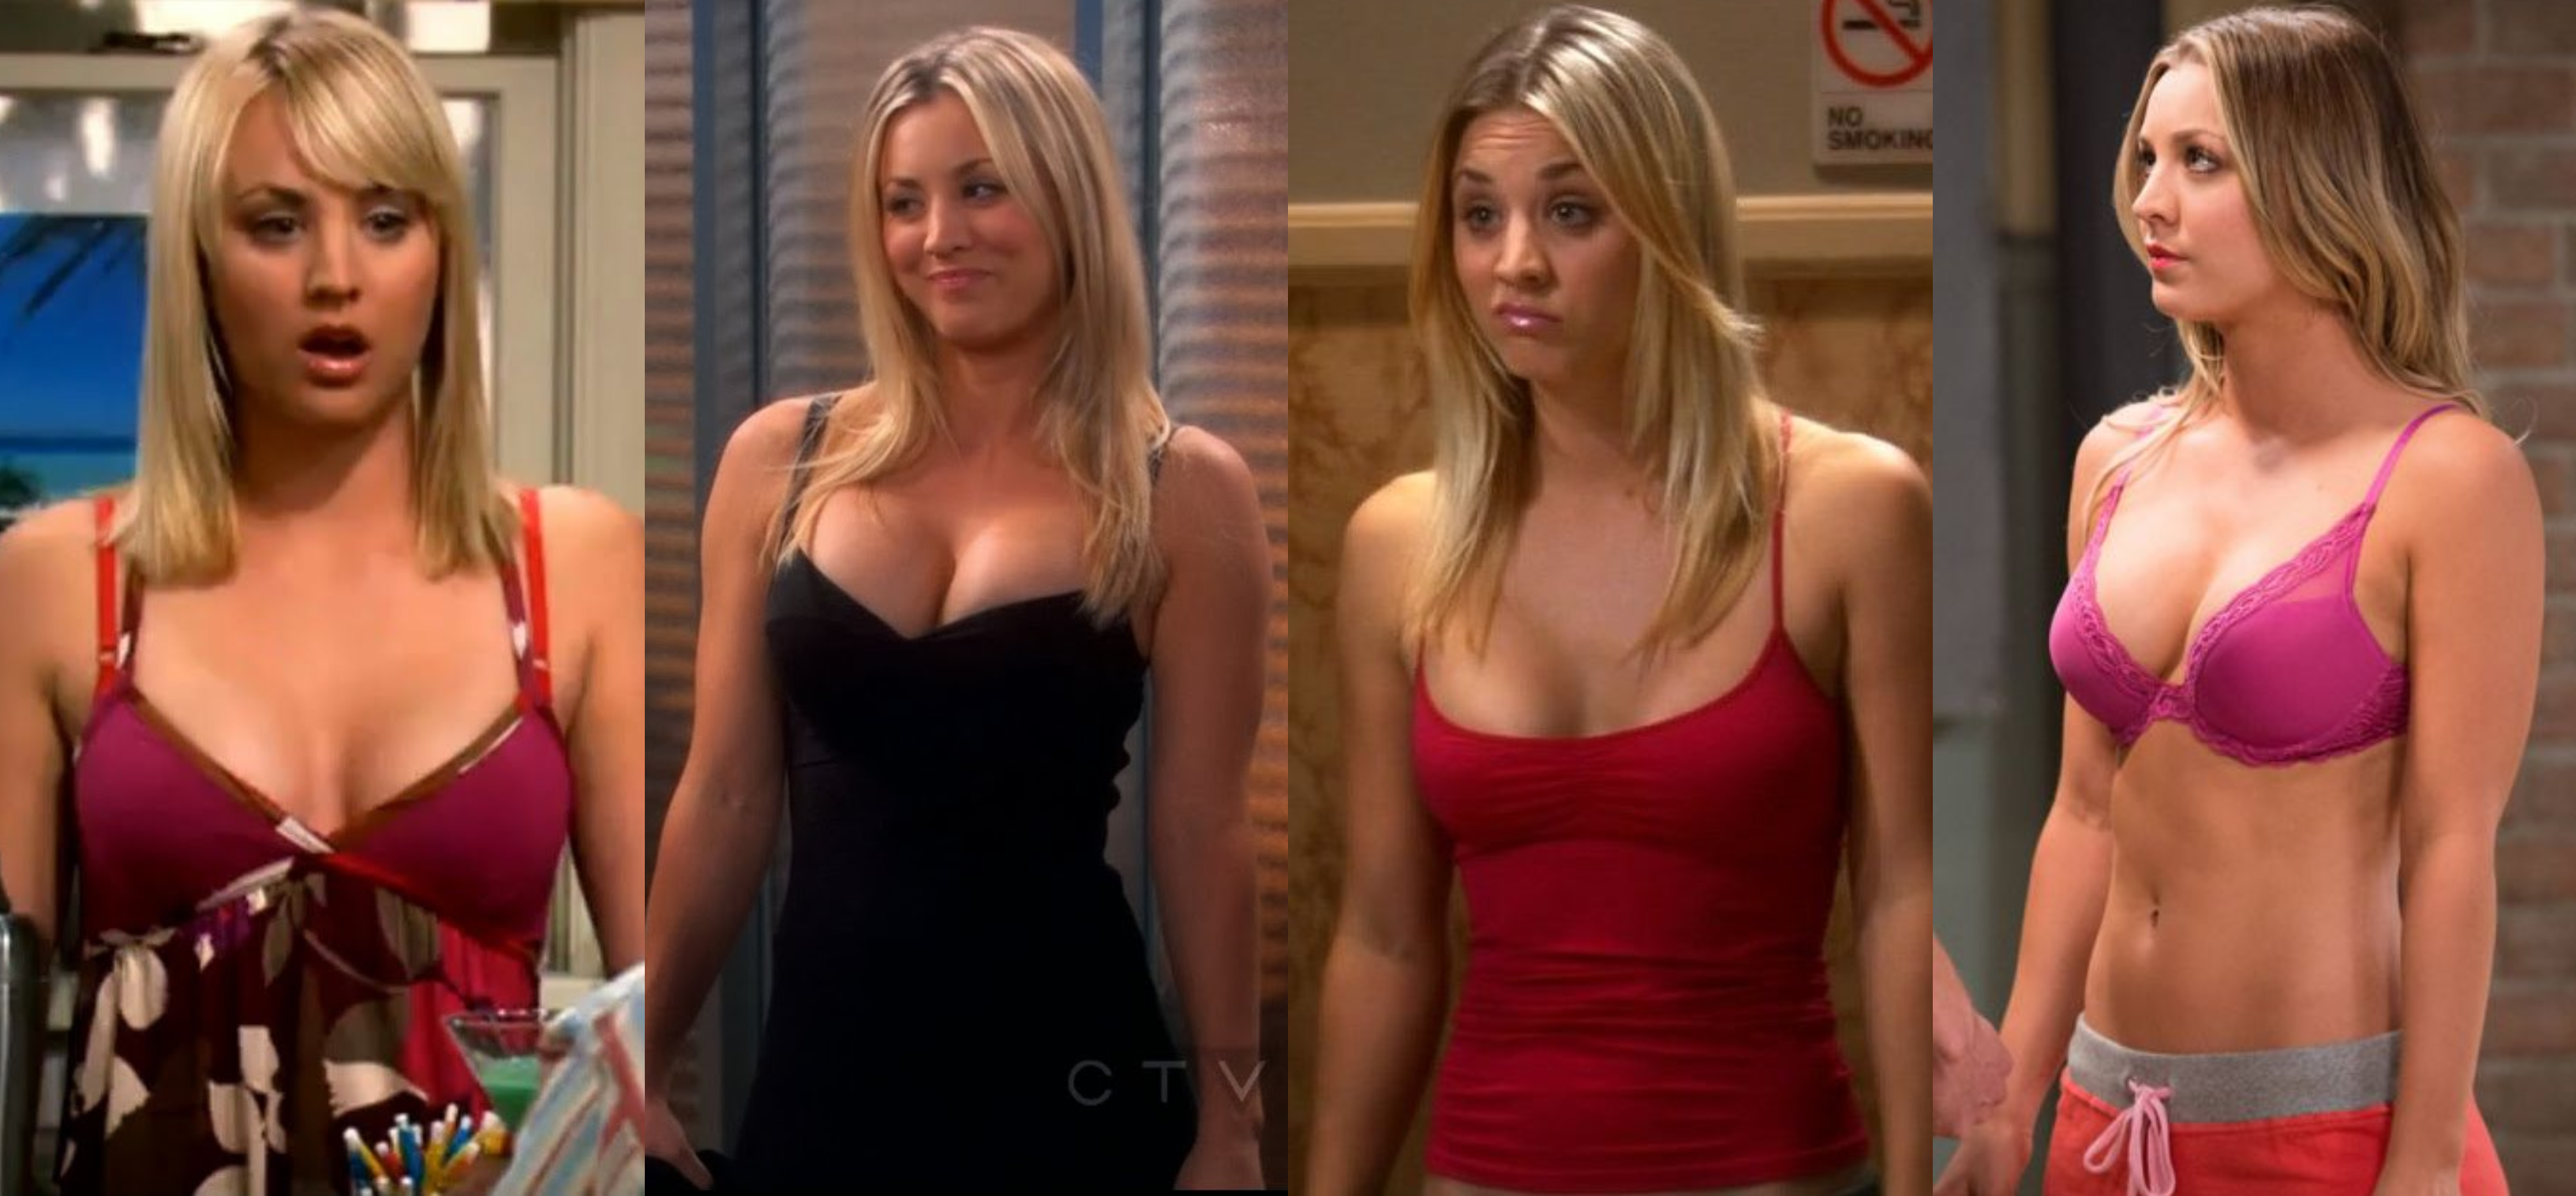 Going through puberty while watching Mommy Kaley Cuoco on The Big Bang Theo...